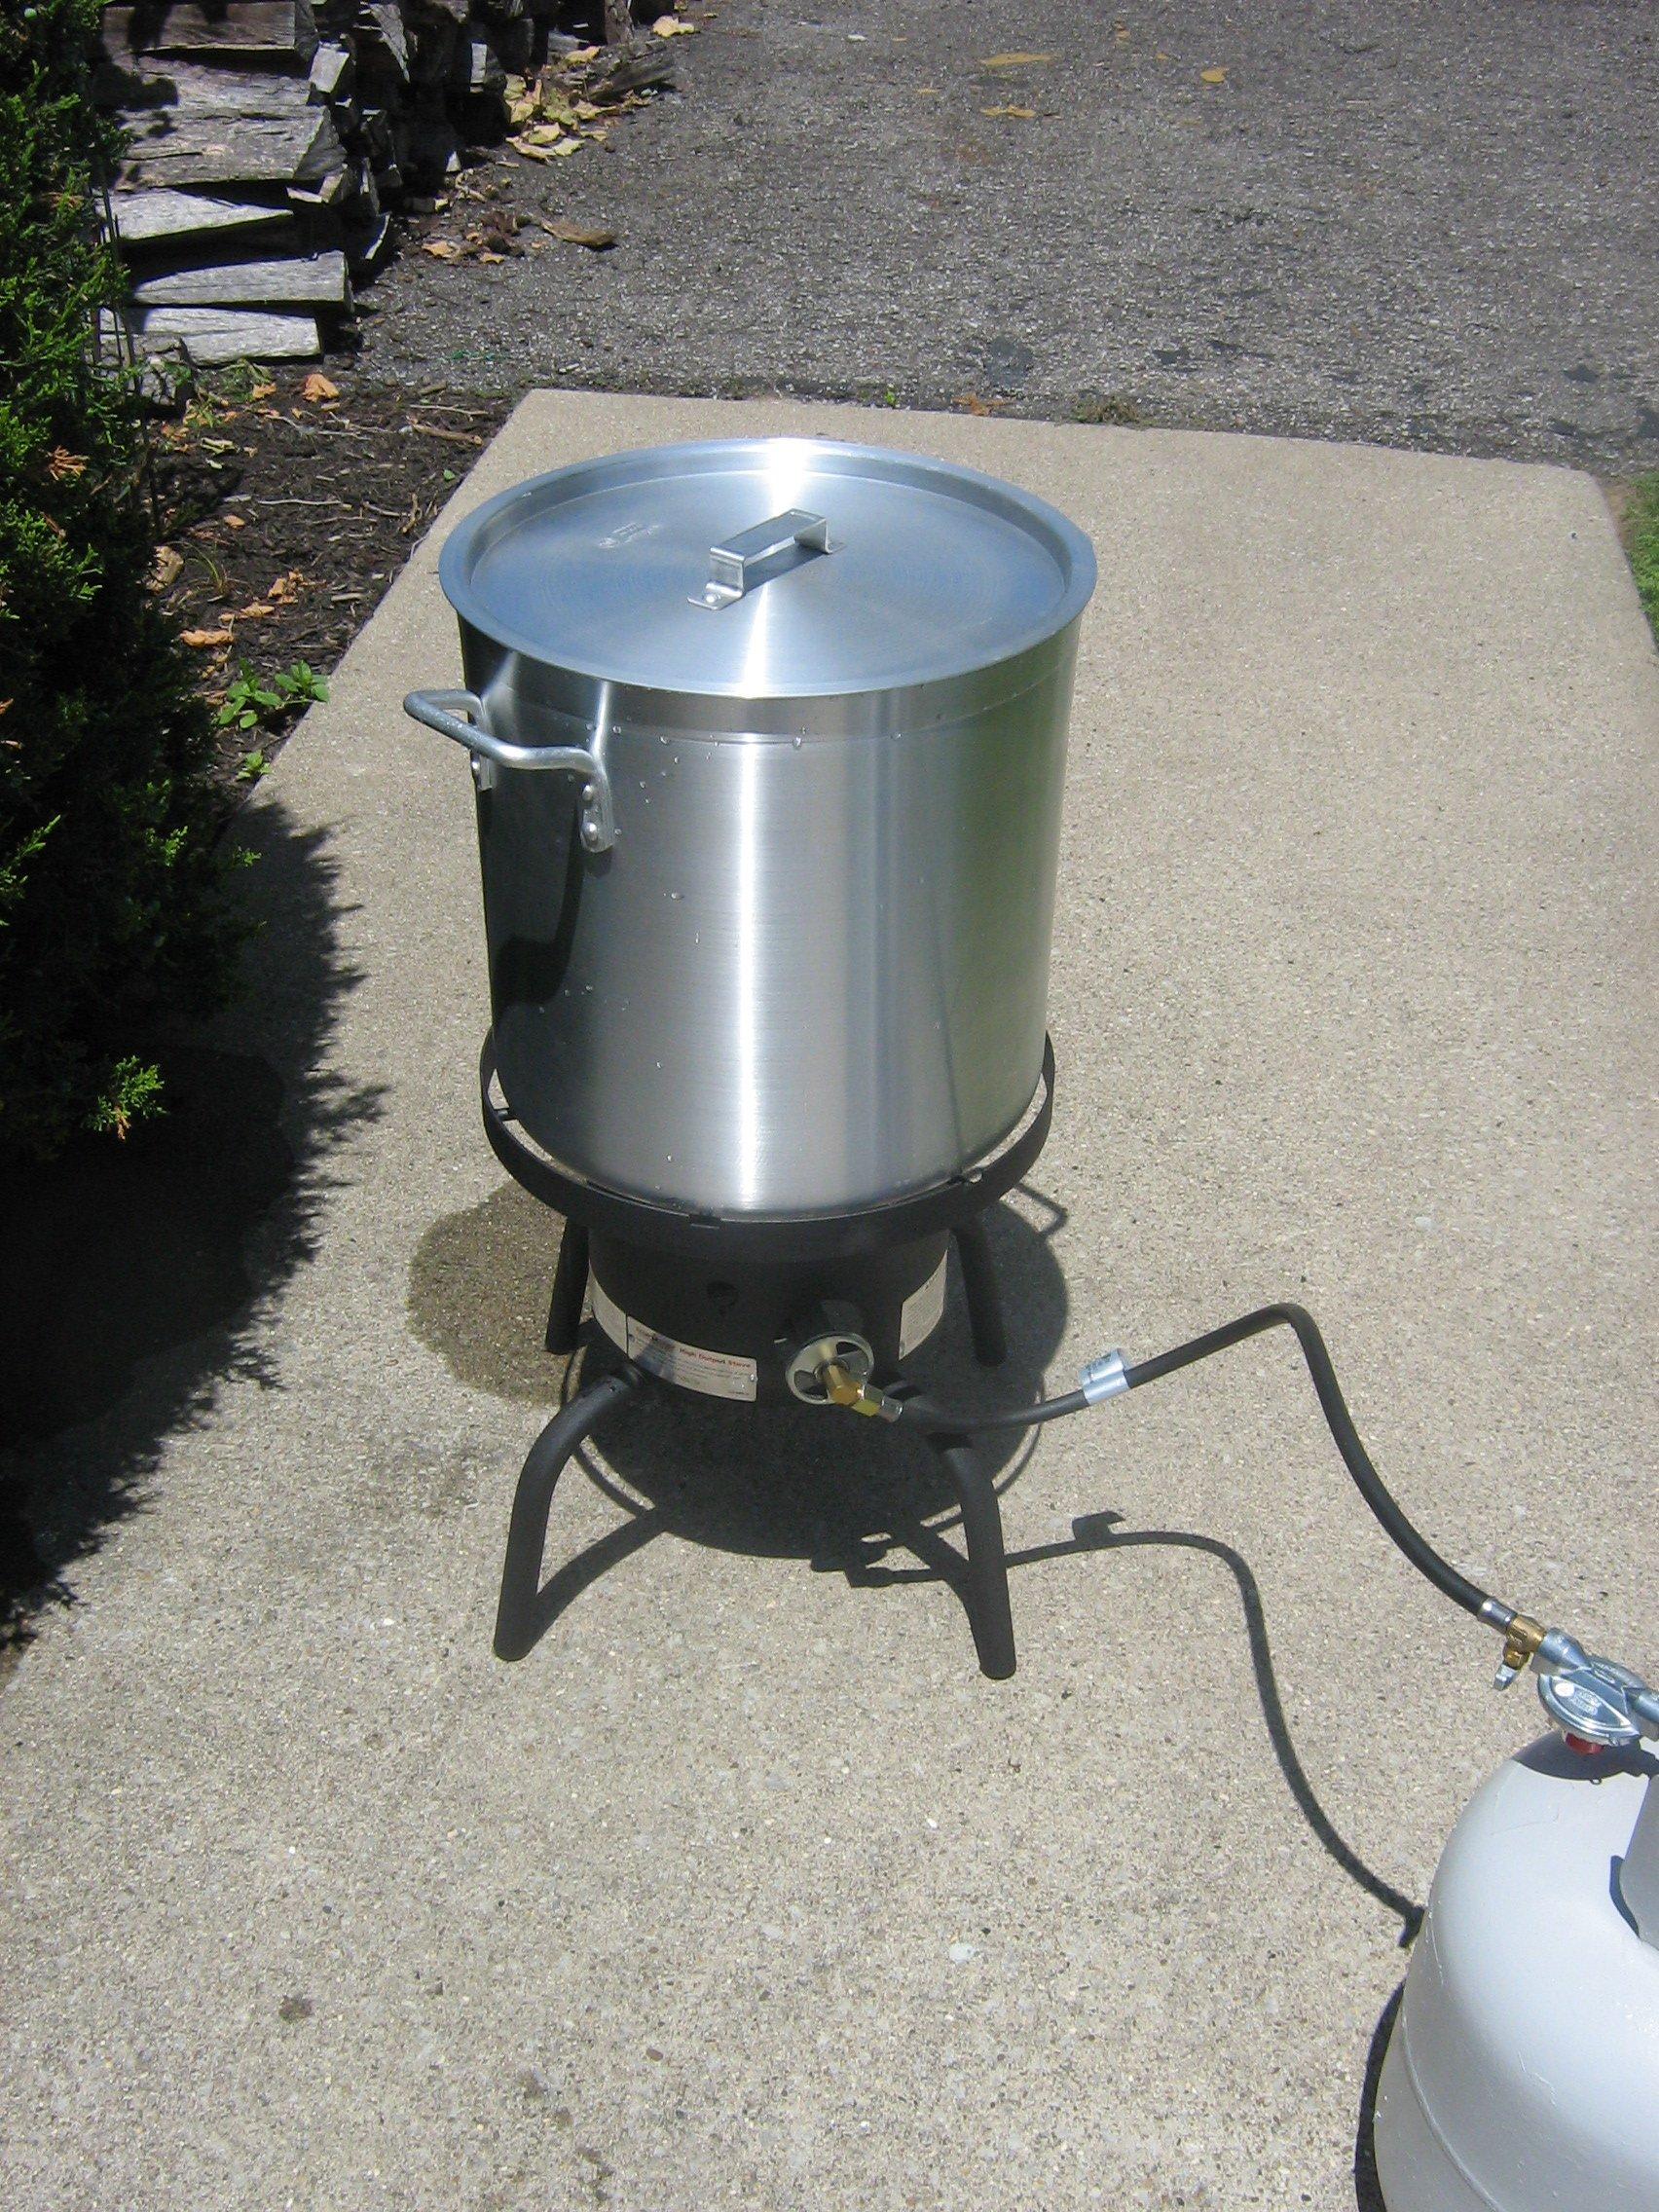 Crawfish boils are best done outdoors. A large stock pot and outdoor burner is the ticket.